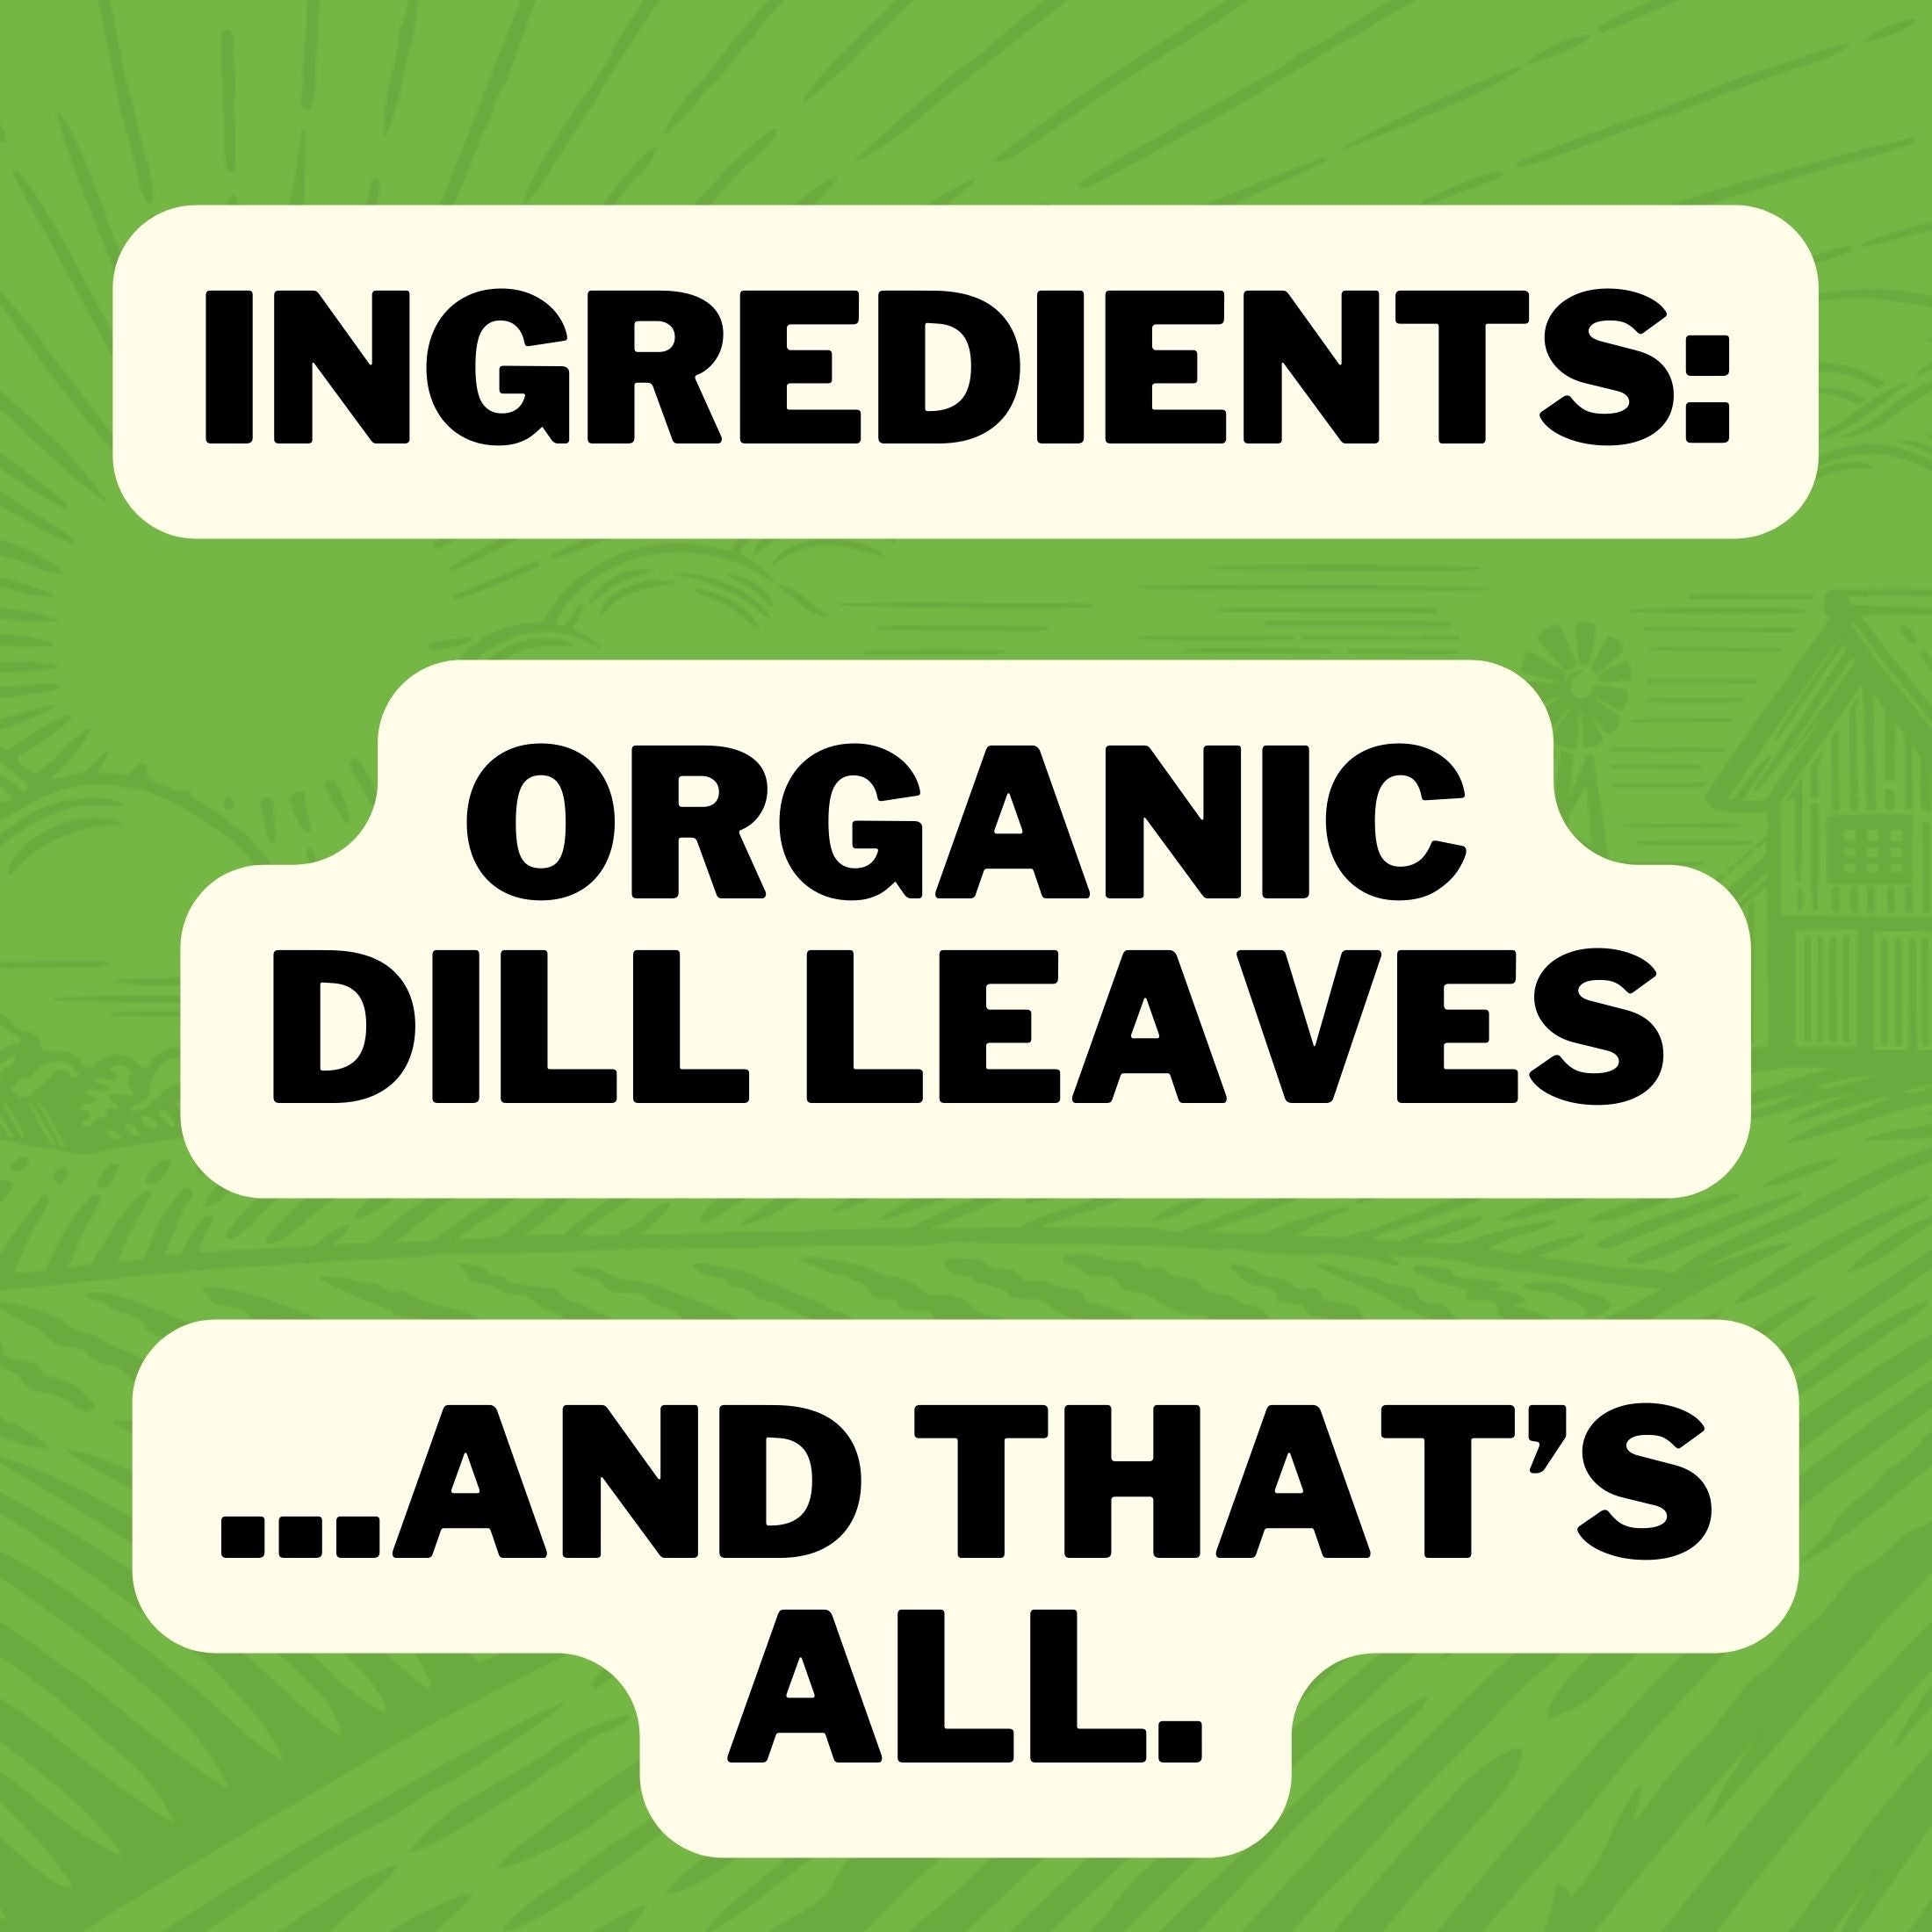 Ingredients: Organic Dill Leaves... and that's all.